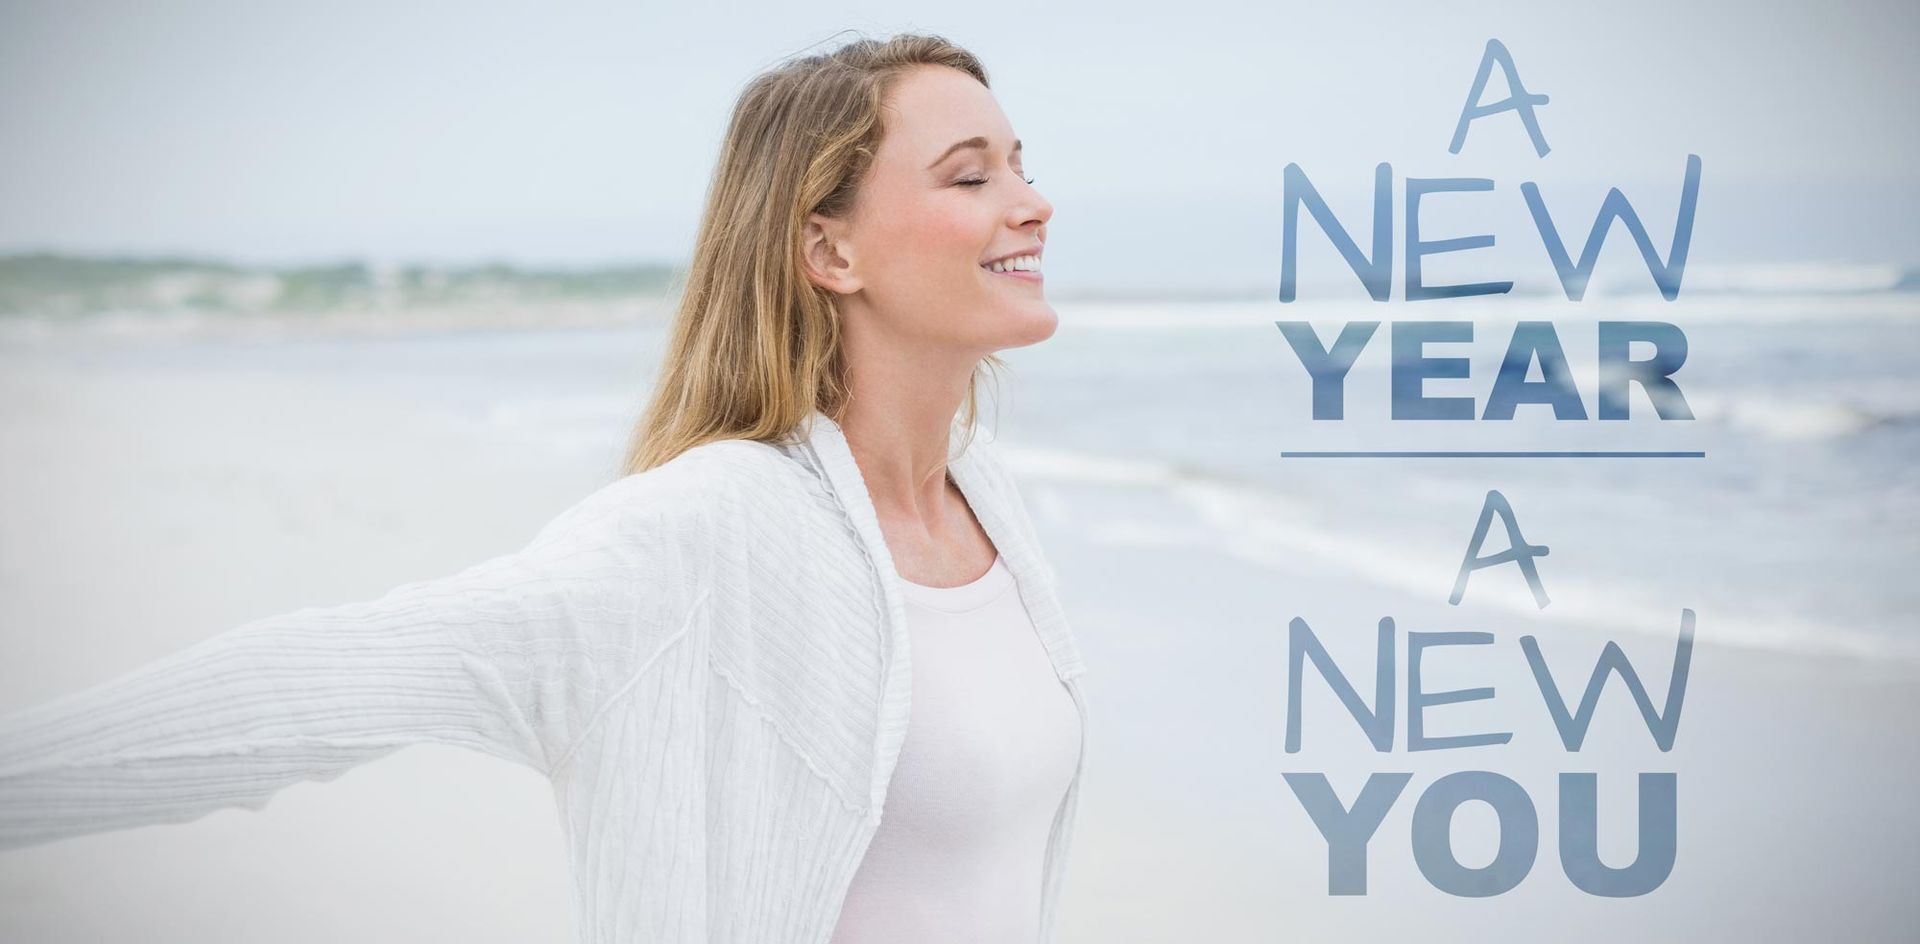 Holistic New Year Resolutions - 24 Things To Consider by Dr. Alicia Armitstead.